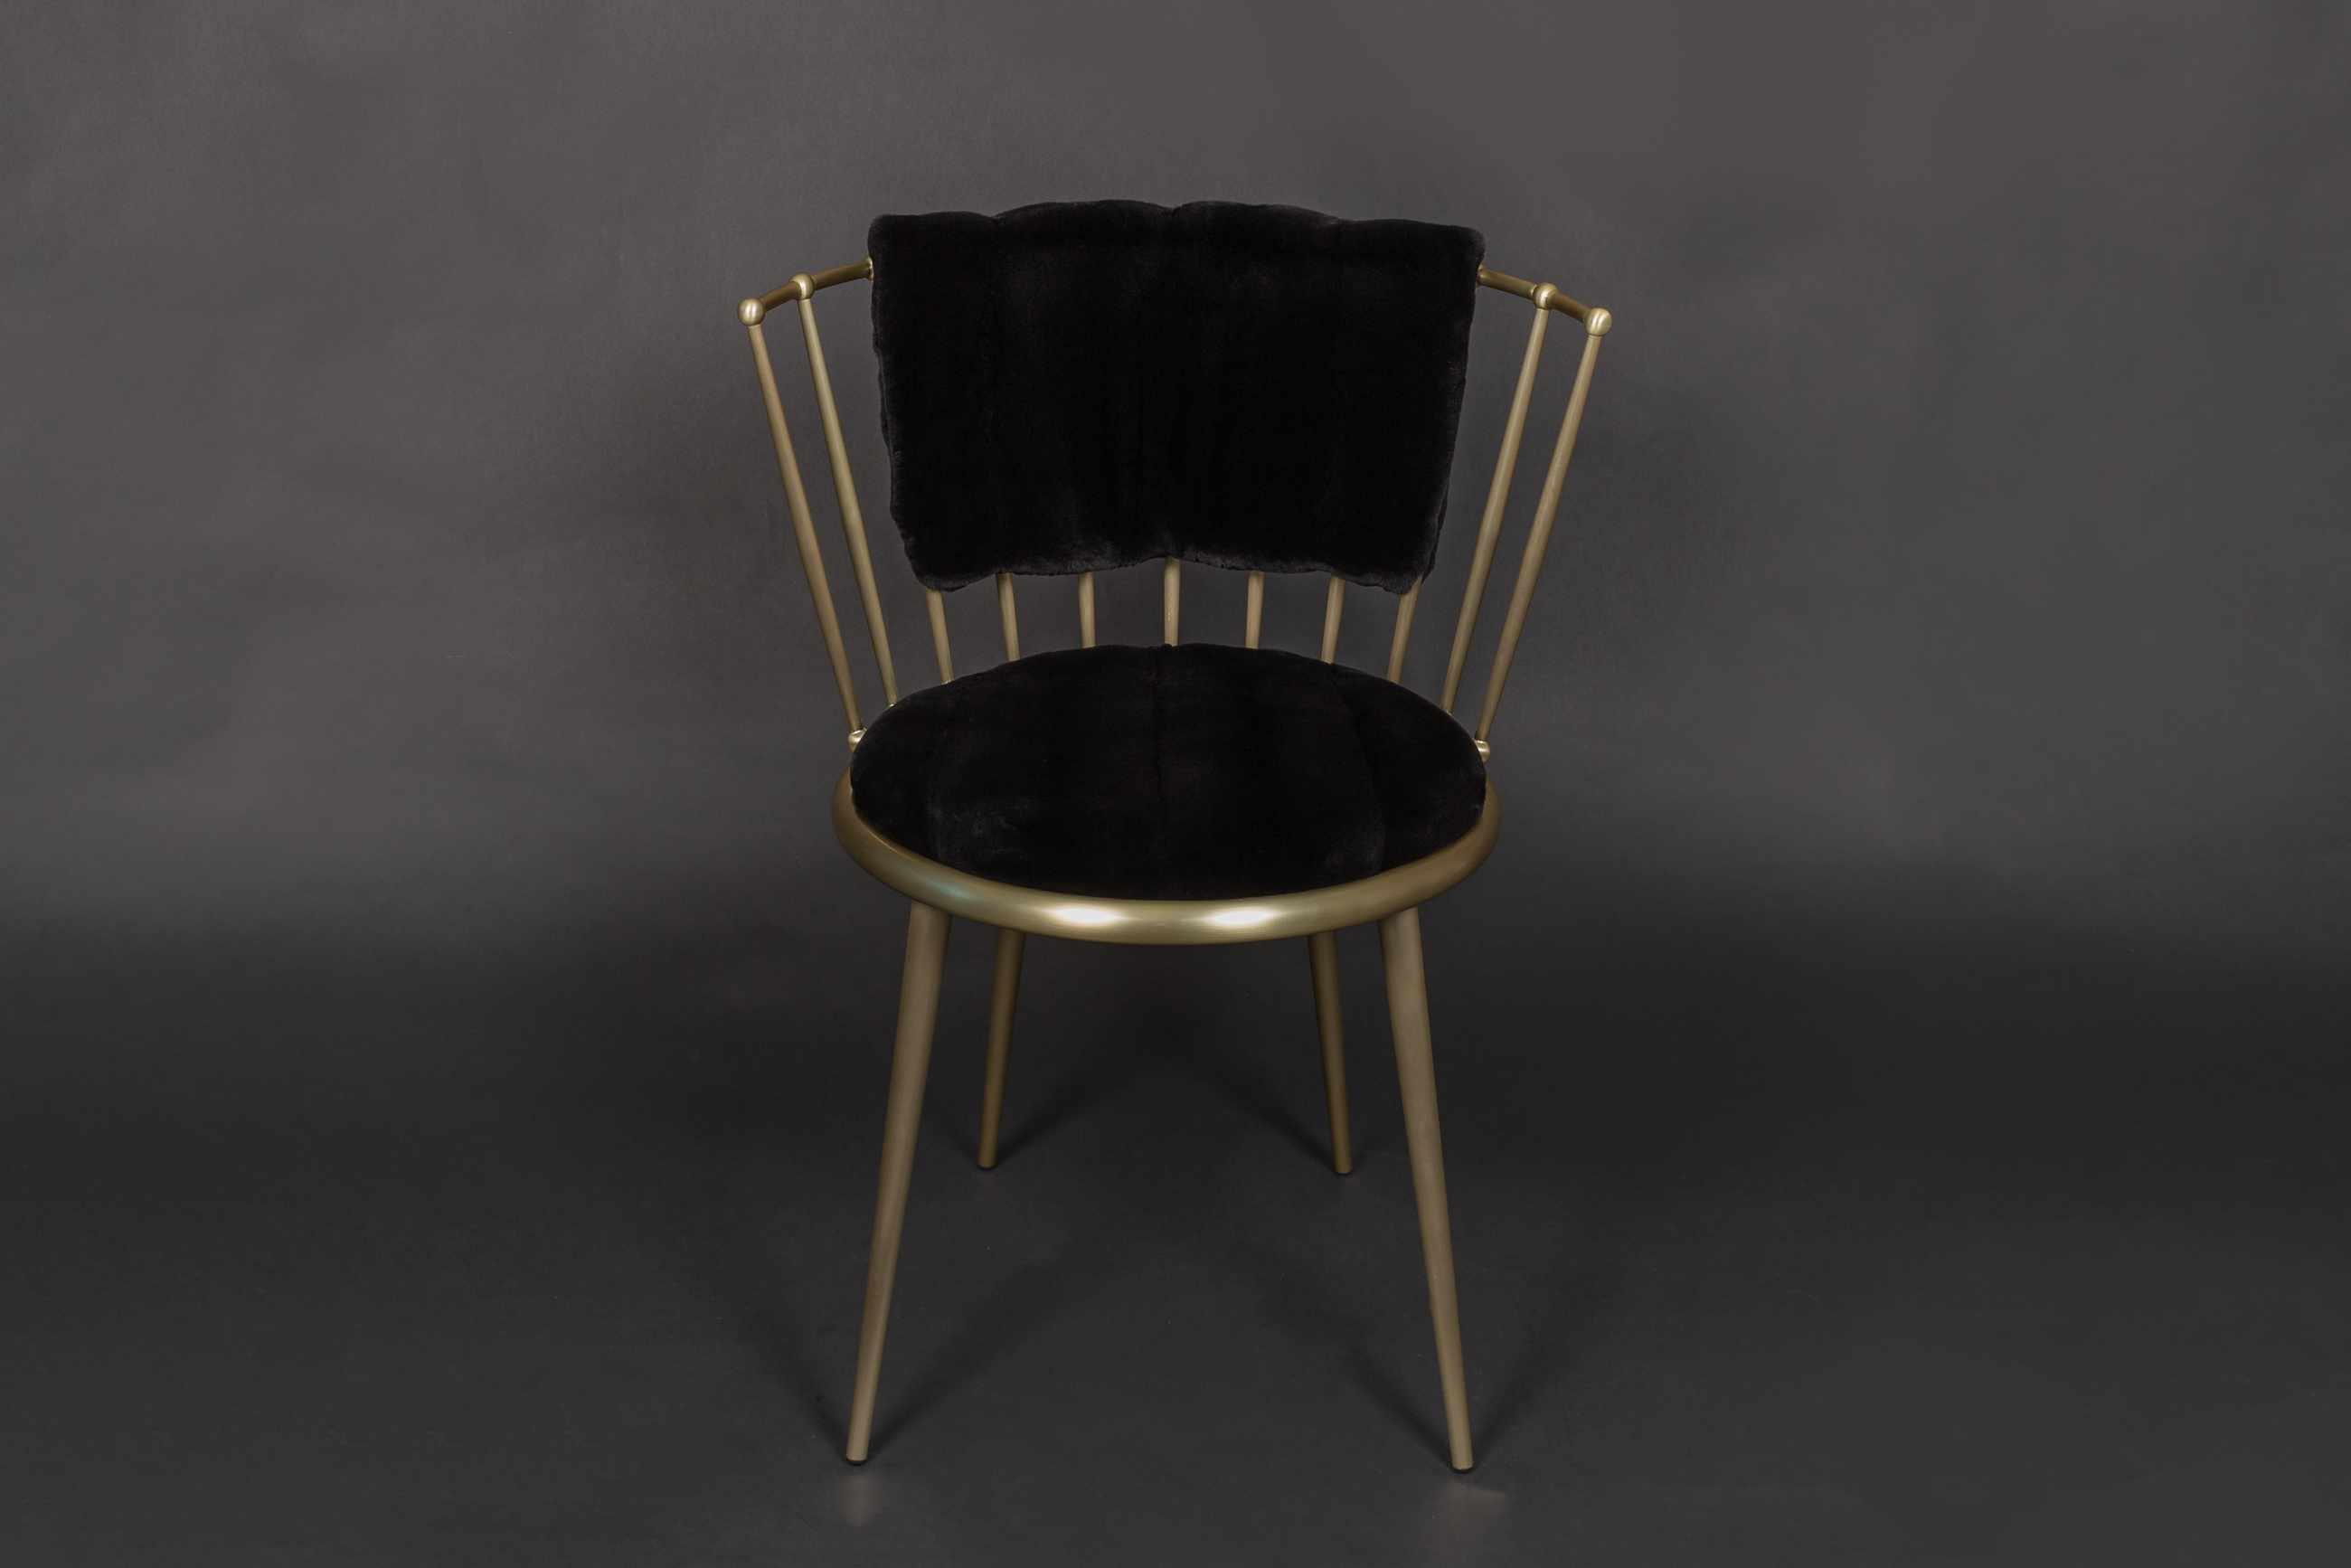 Plucked Mink Chair in Black - Cantori